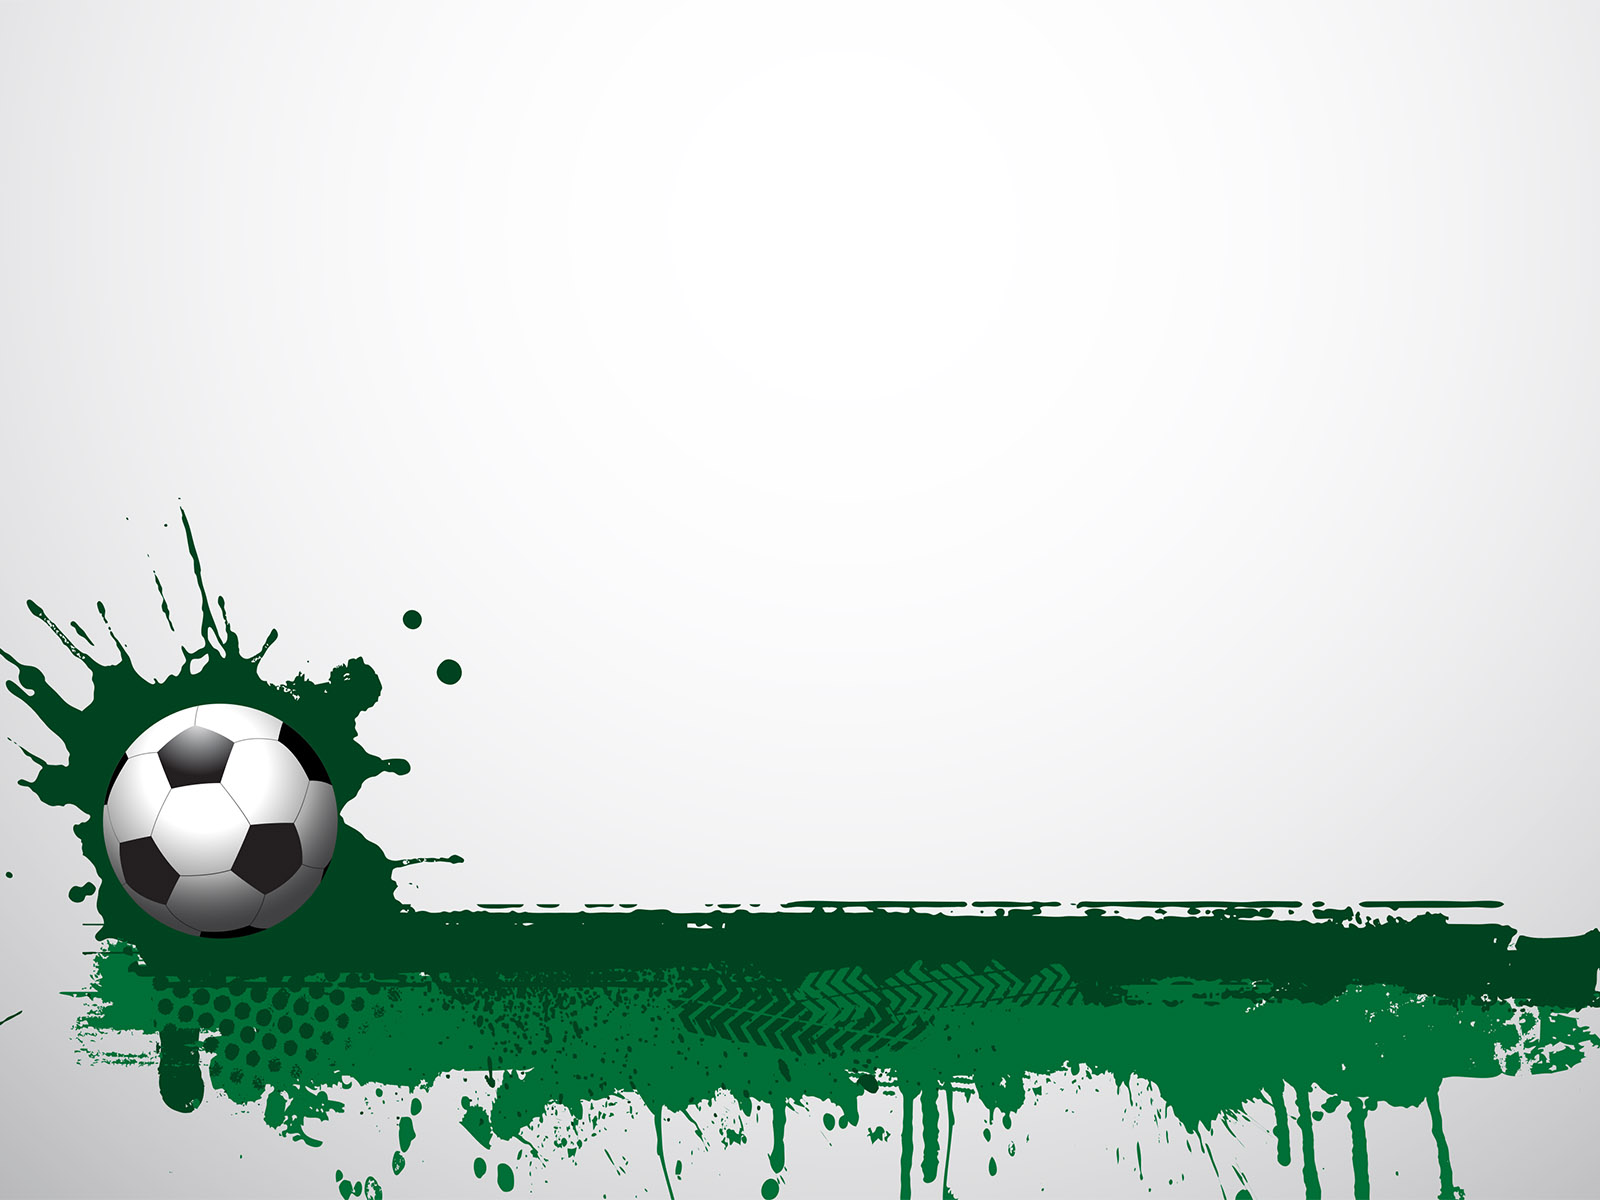 Football Grunge Backgrounds   Green Sports   PPT Backgrounds